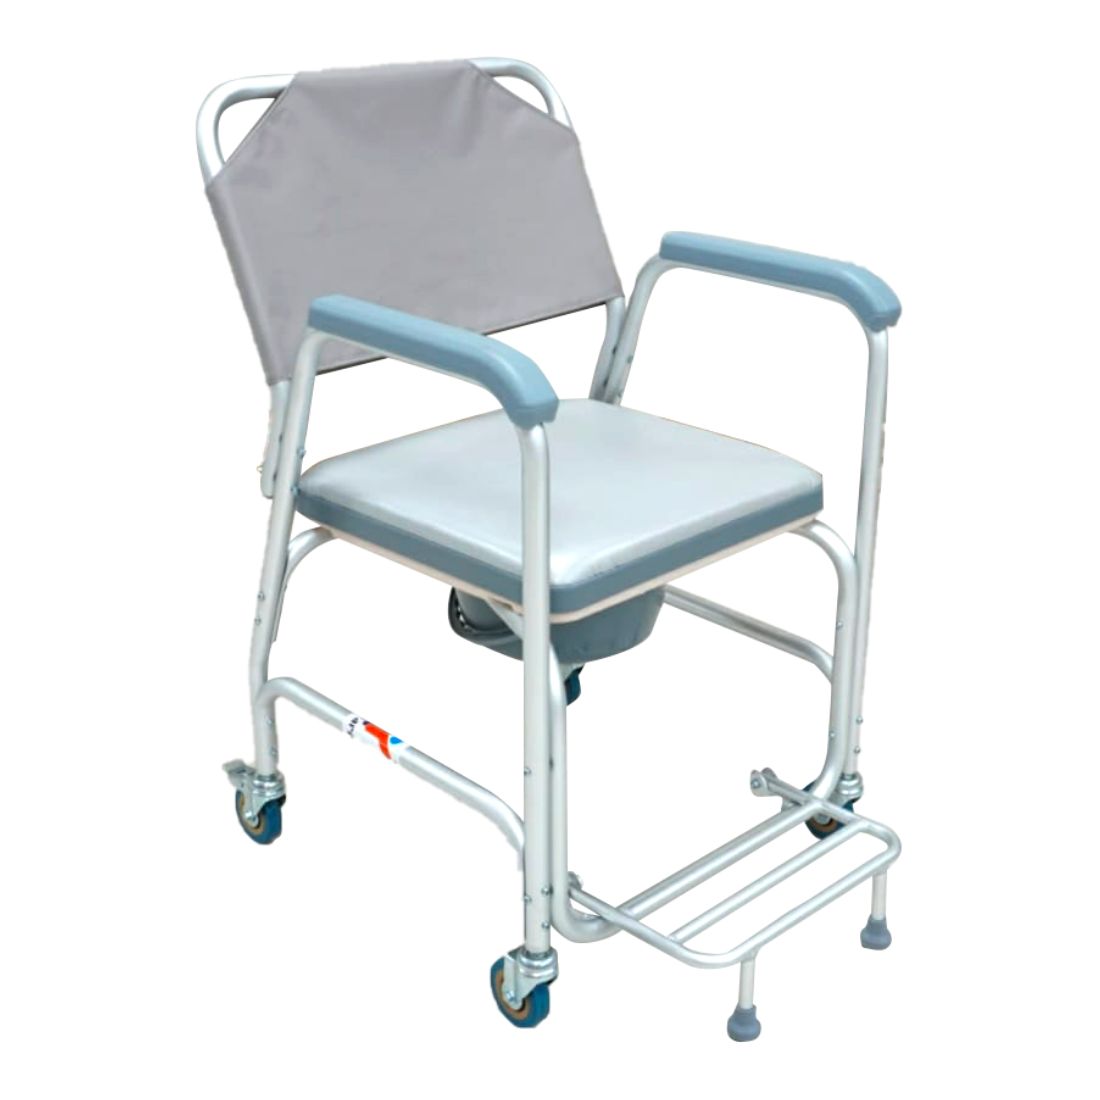 Commode Wheelchair Aluminium with Cushion Seat, 2" Solid Castor Wheels, Waterproof